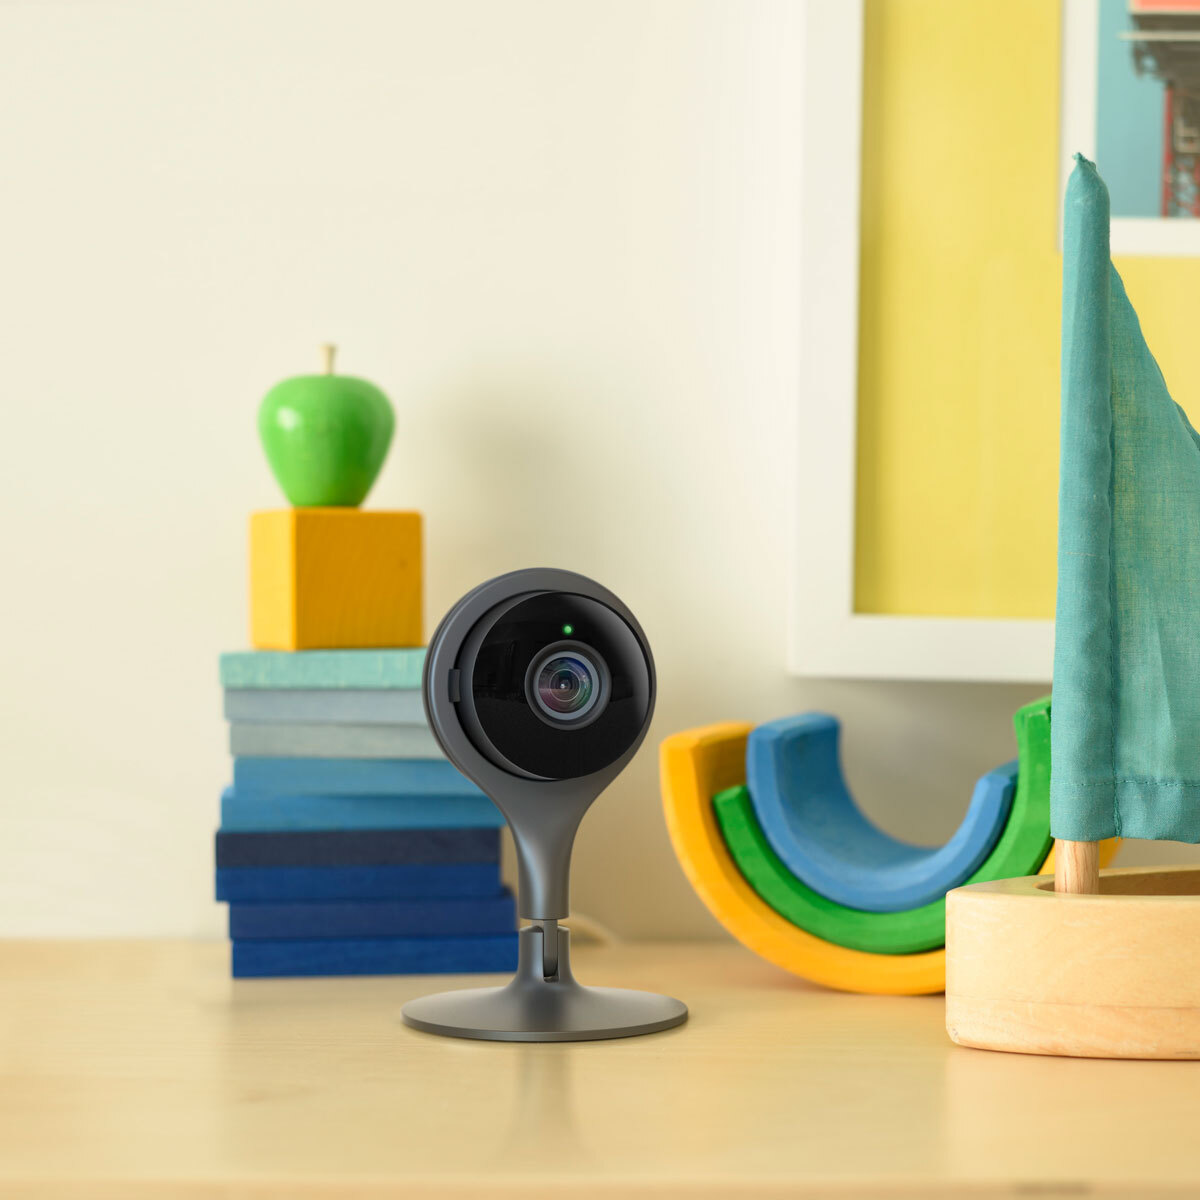 Lifestyle image of indoor camera in playroom